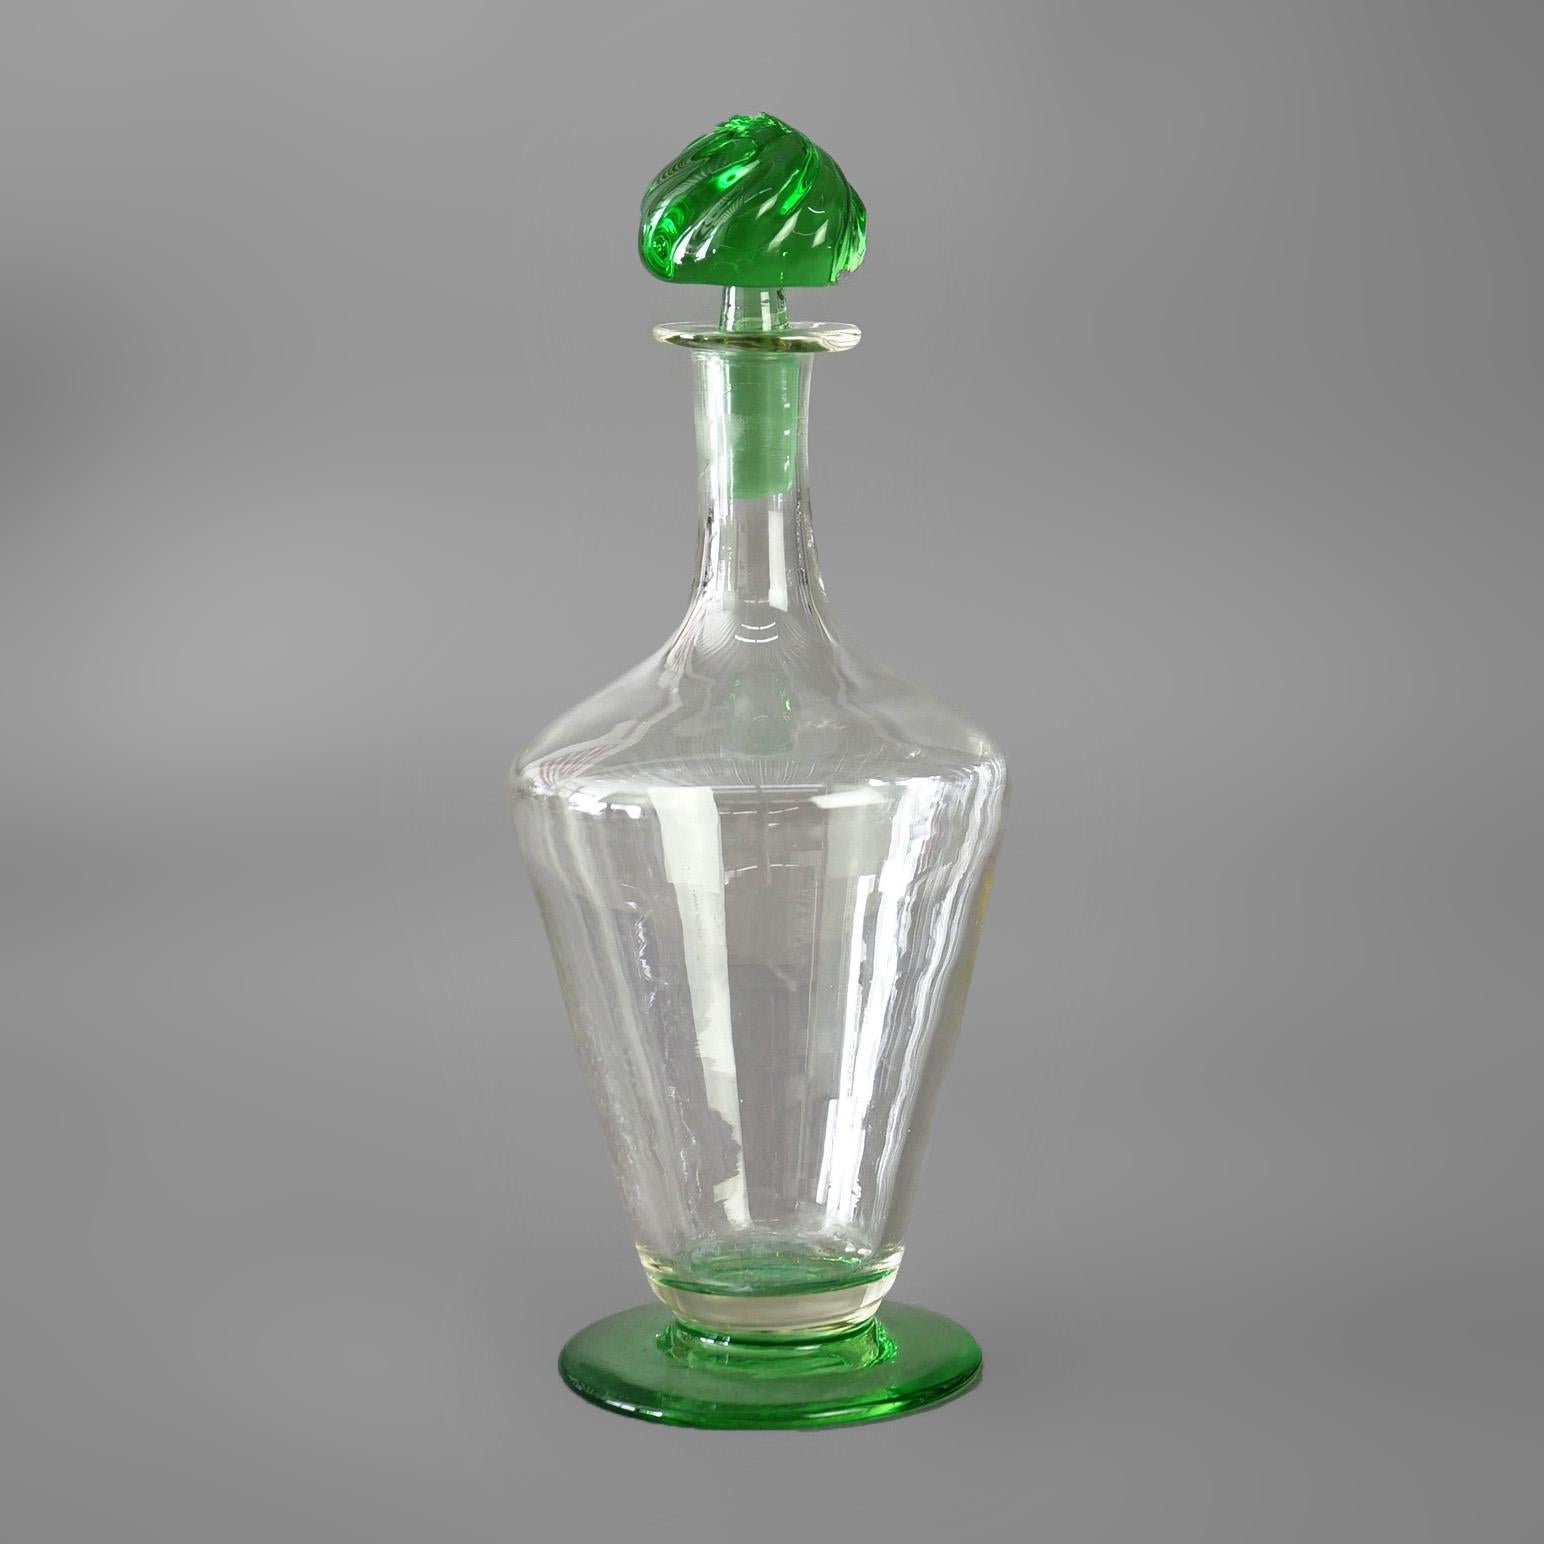 An antique decanter attributed to Steuben offers Celeste green and colorless art glass construction in tapered form and having swirled stopper, c1920

Measures - 13